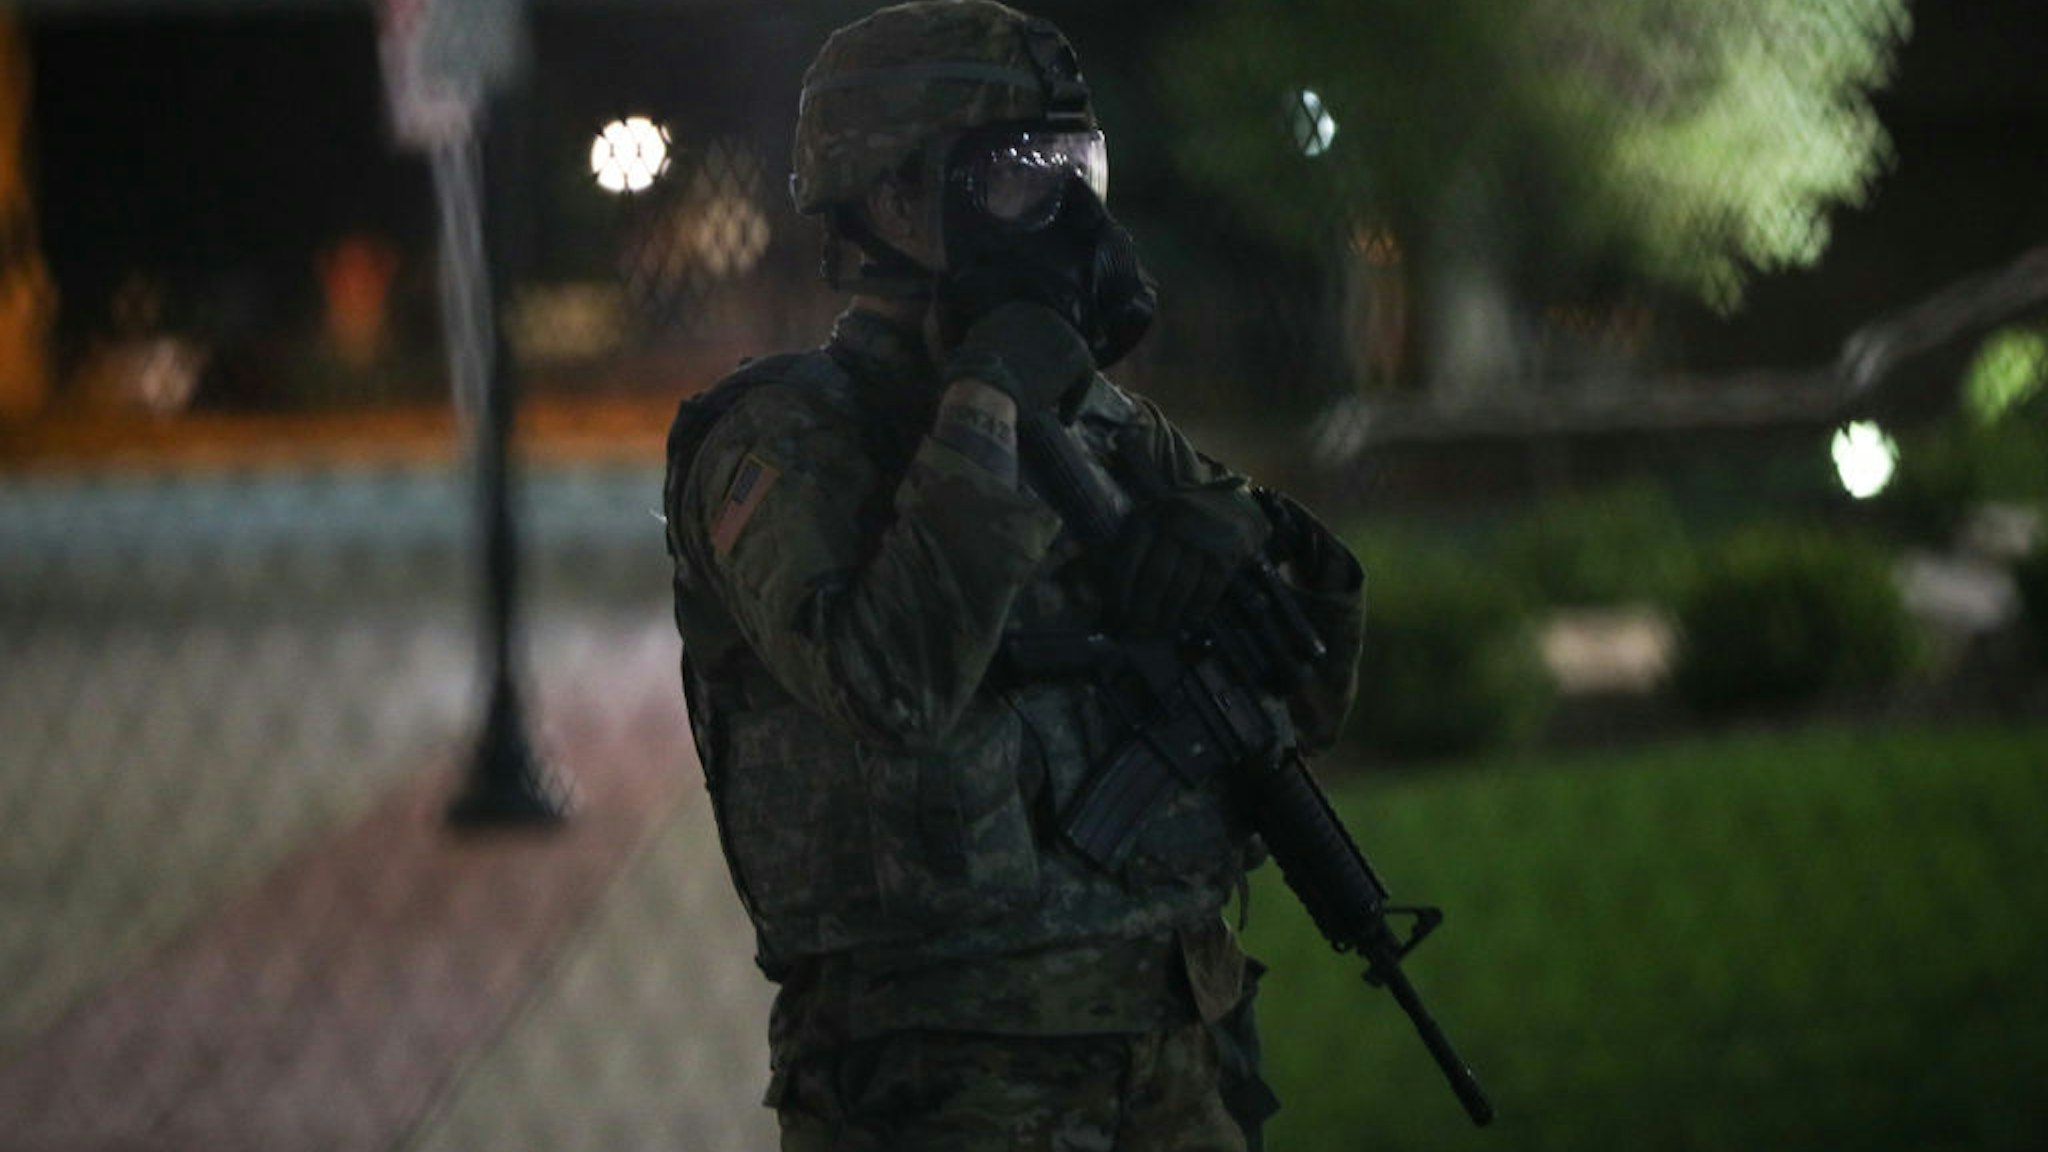 KENOSHA, WISCONSIN, USA - AUGUST 25: Police take security measurements during a third night of unrest on August 25, 2020 in Kenosha, Wisconsin, United States. Wisconsin expands Natâl Guard presence amid unrest. Governor declares state of emergency as civil unrest in Kenosha continues after Black man was shot several times at close range in the back during an encounter with a police officer on Sunday. (Photo by Tayfun Coskun/Anadolu Agency via Getty Images)